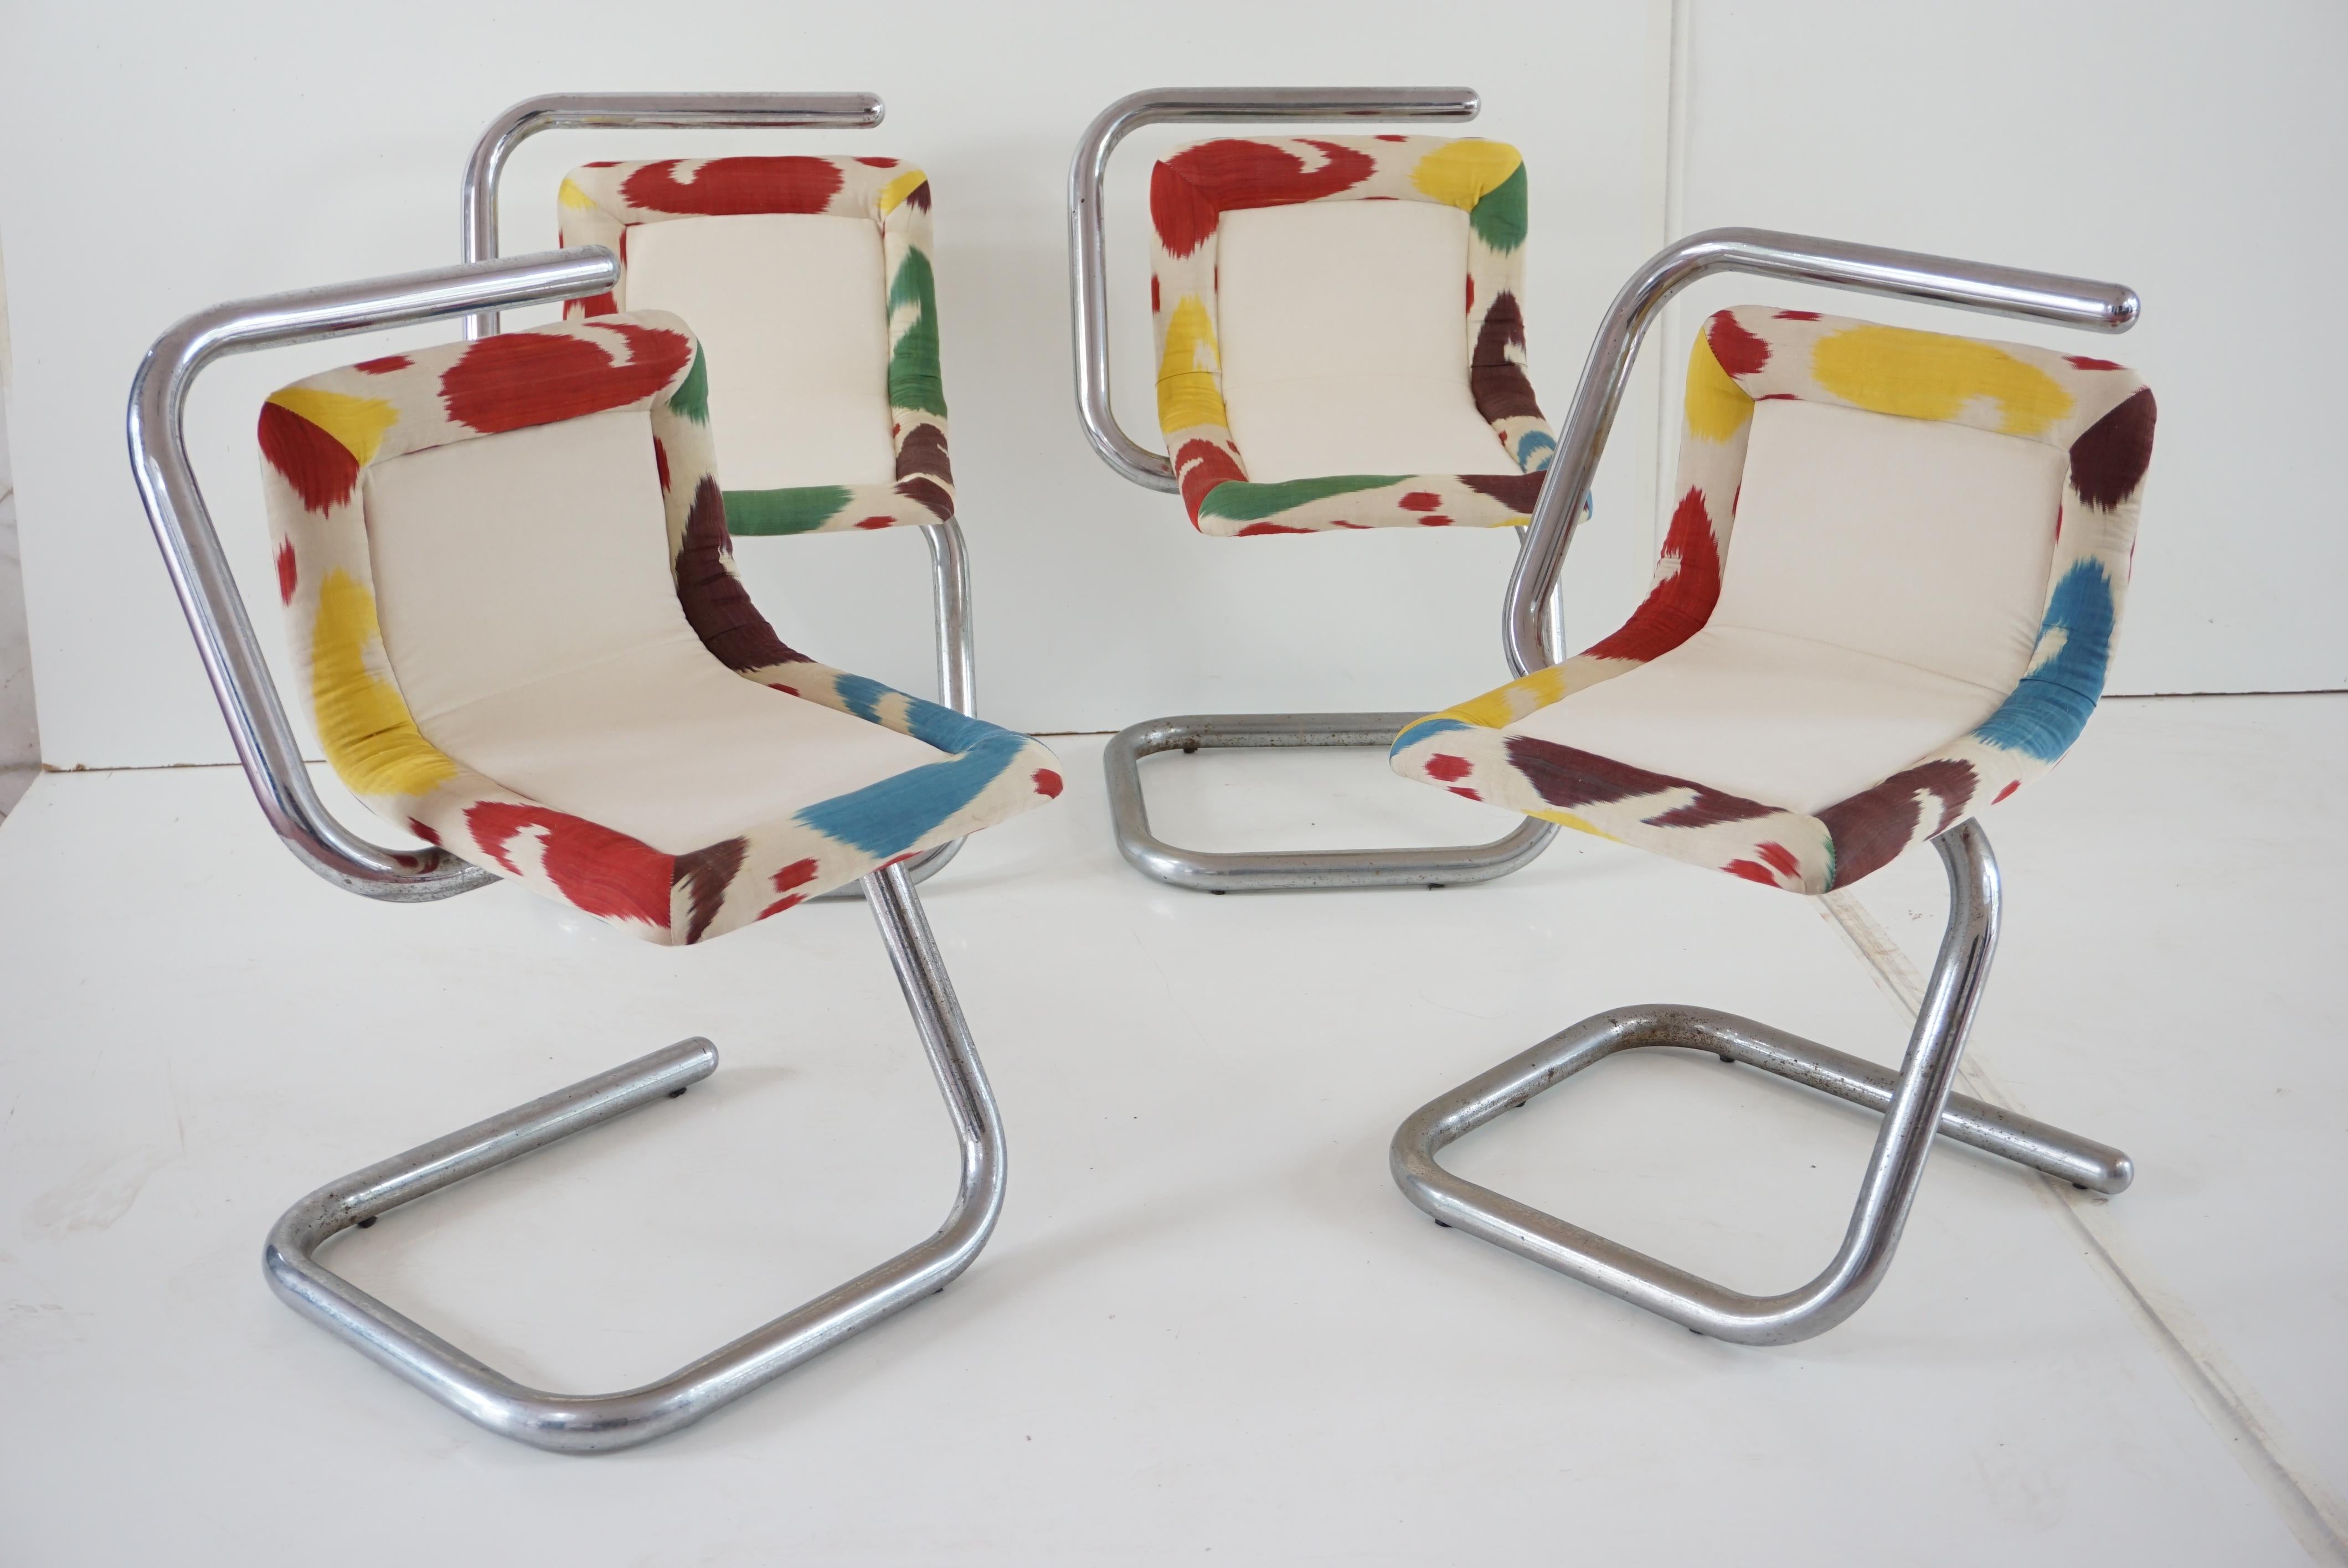 Italian Set of Four Tubular Chrome Chairs, Velvet and Ikat, 1970 by Giotto Stoppino For Sale